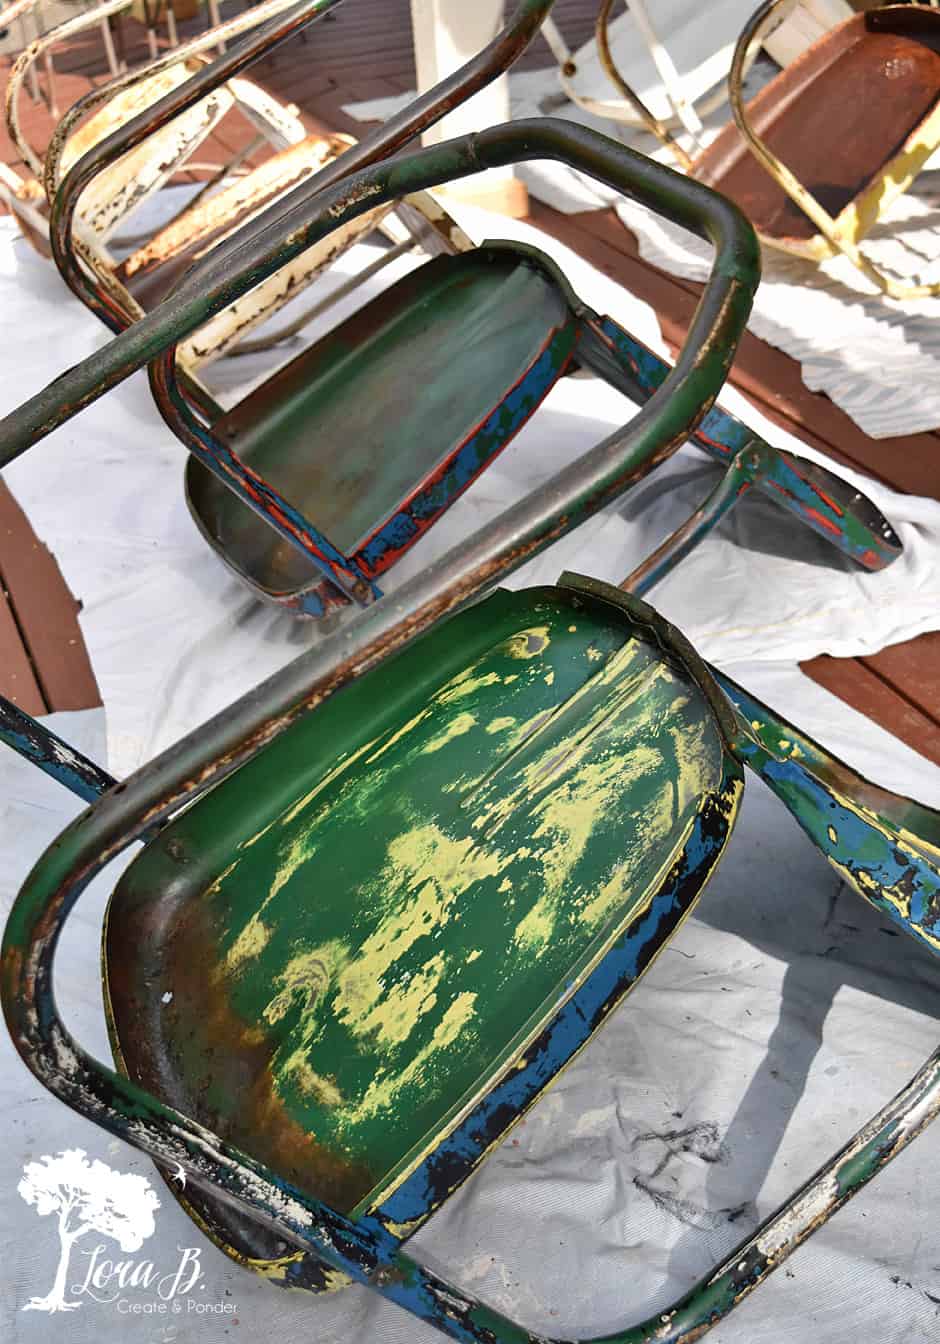 vintage lawn chairs upside down